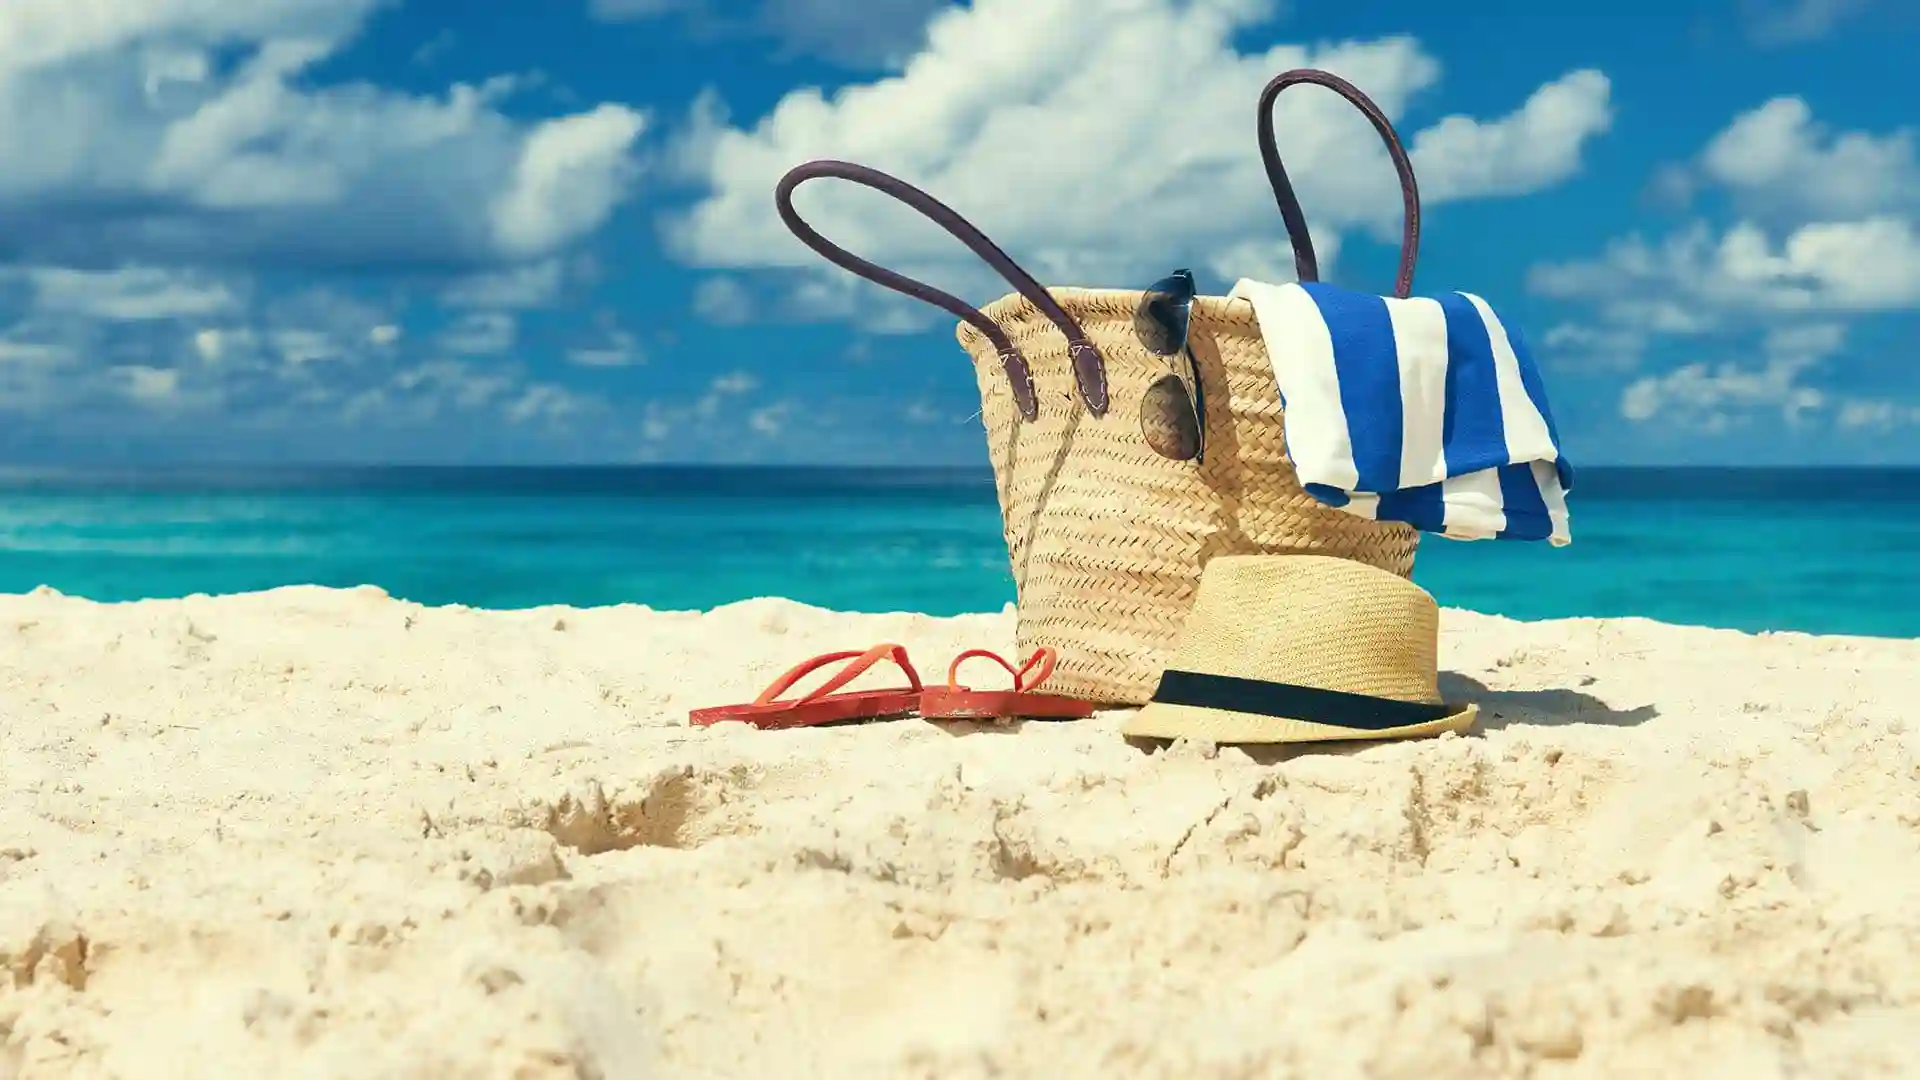 Beach bag with towel, sunglasses, hat and flipflops on beach.